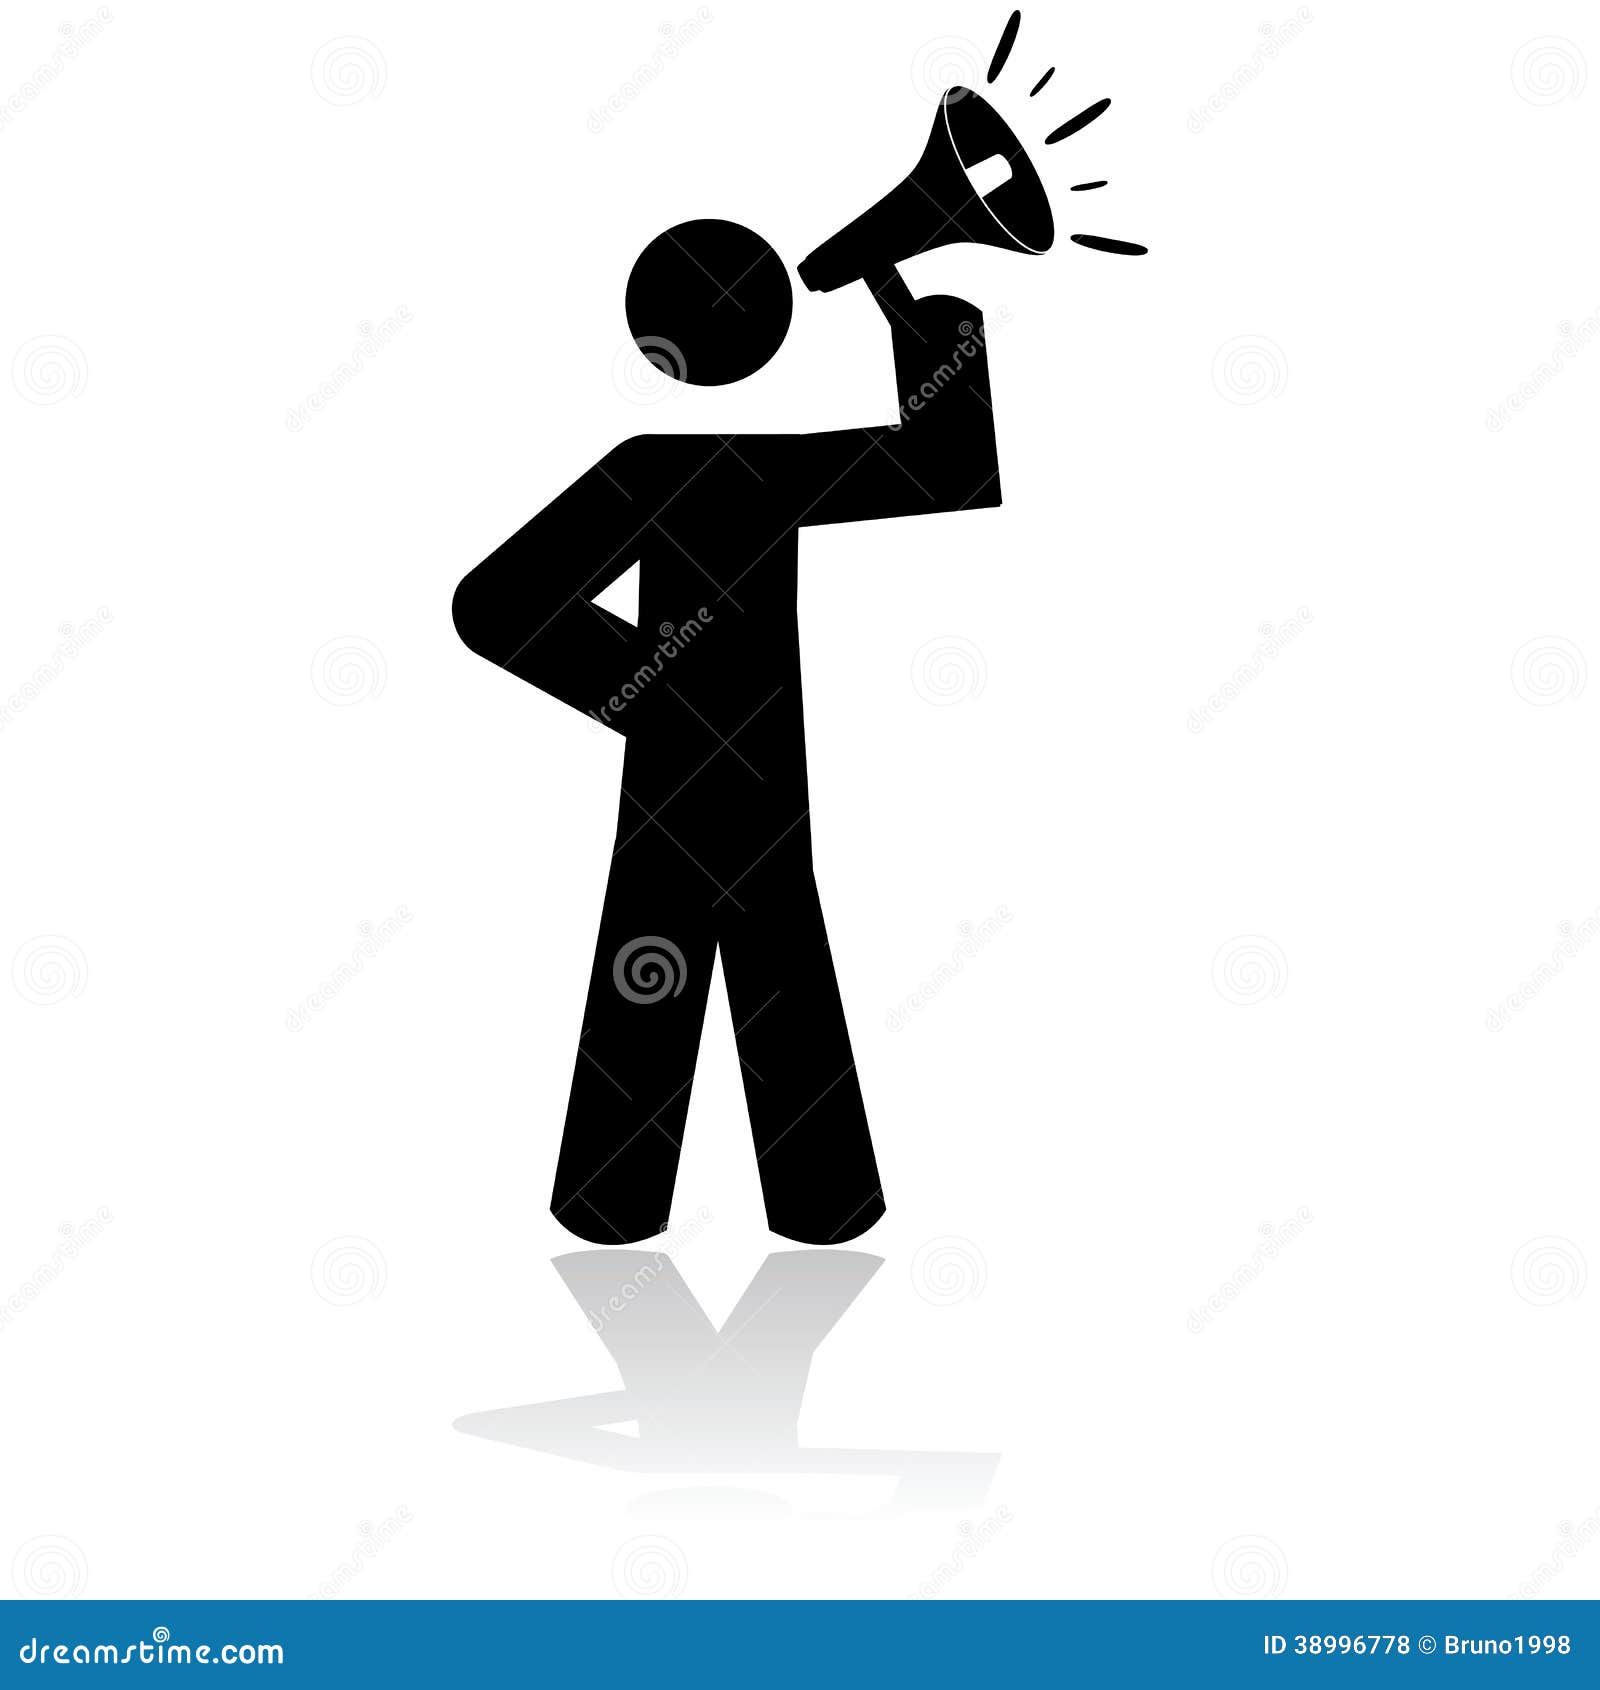 clipart man with megaphone - photo #31